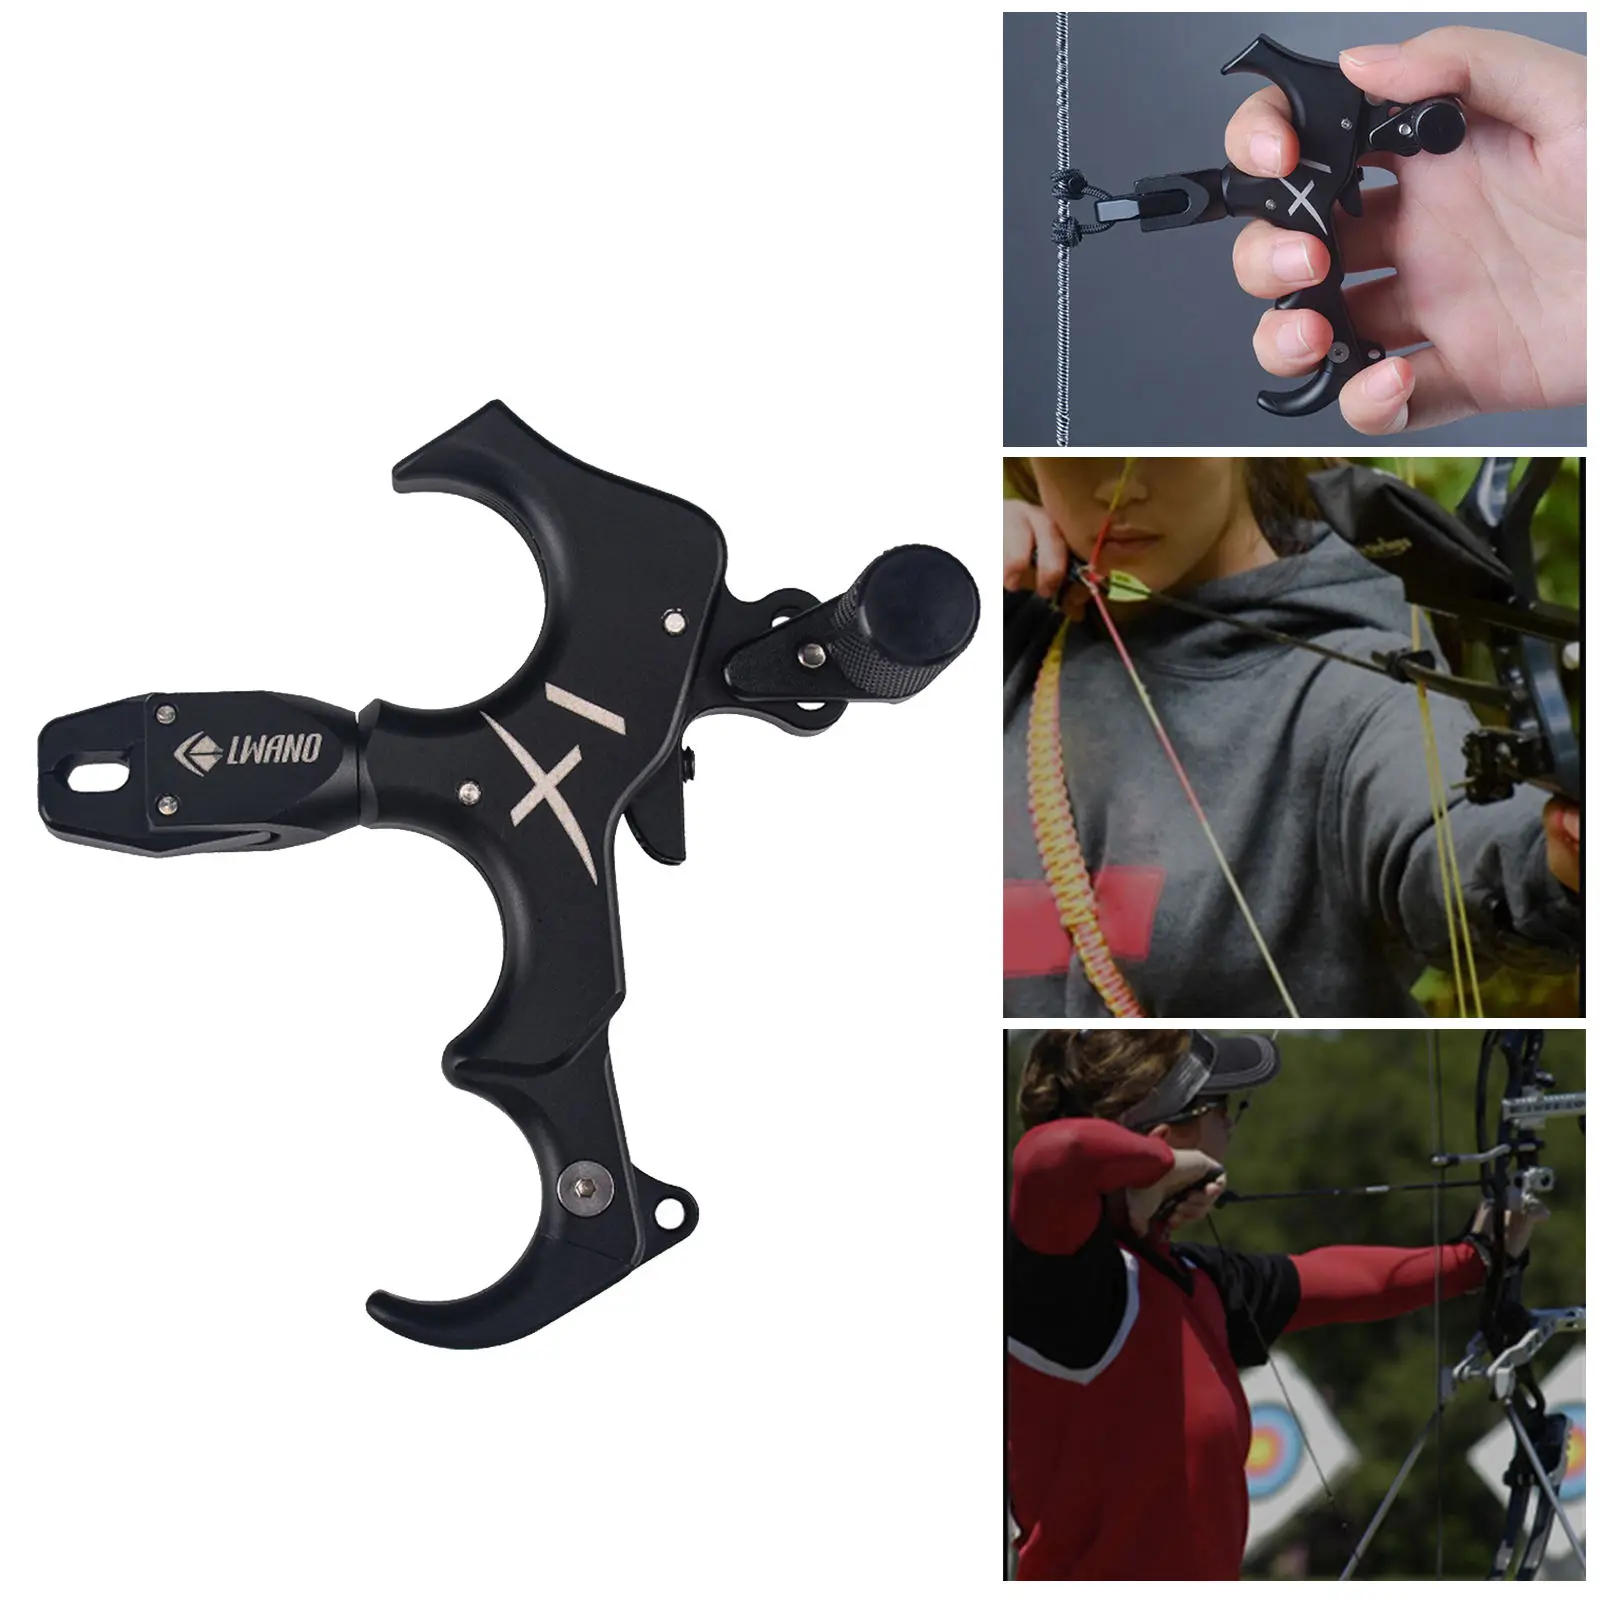 3 Finger Grip Caliper Arrow Release Aids for Compound Bow Hunting Archery 